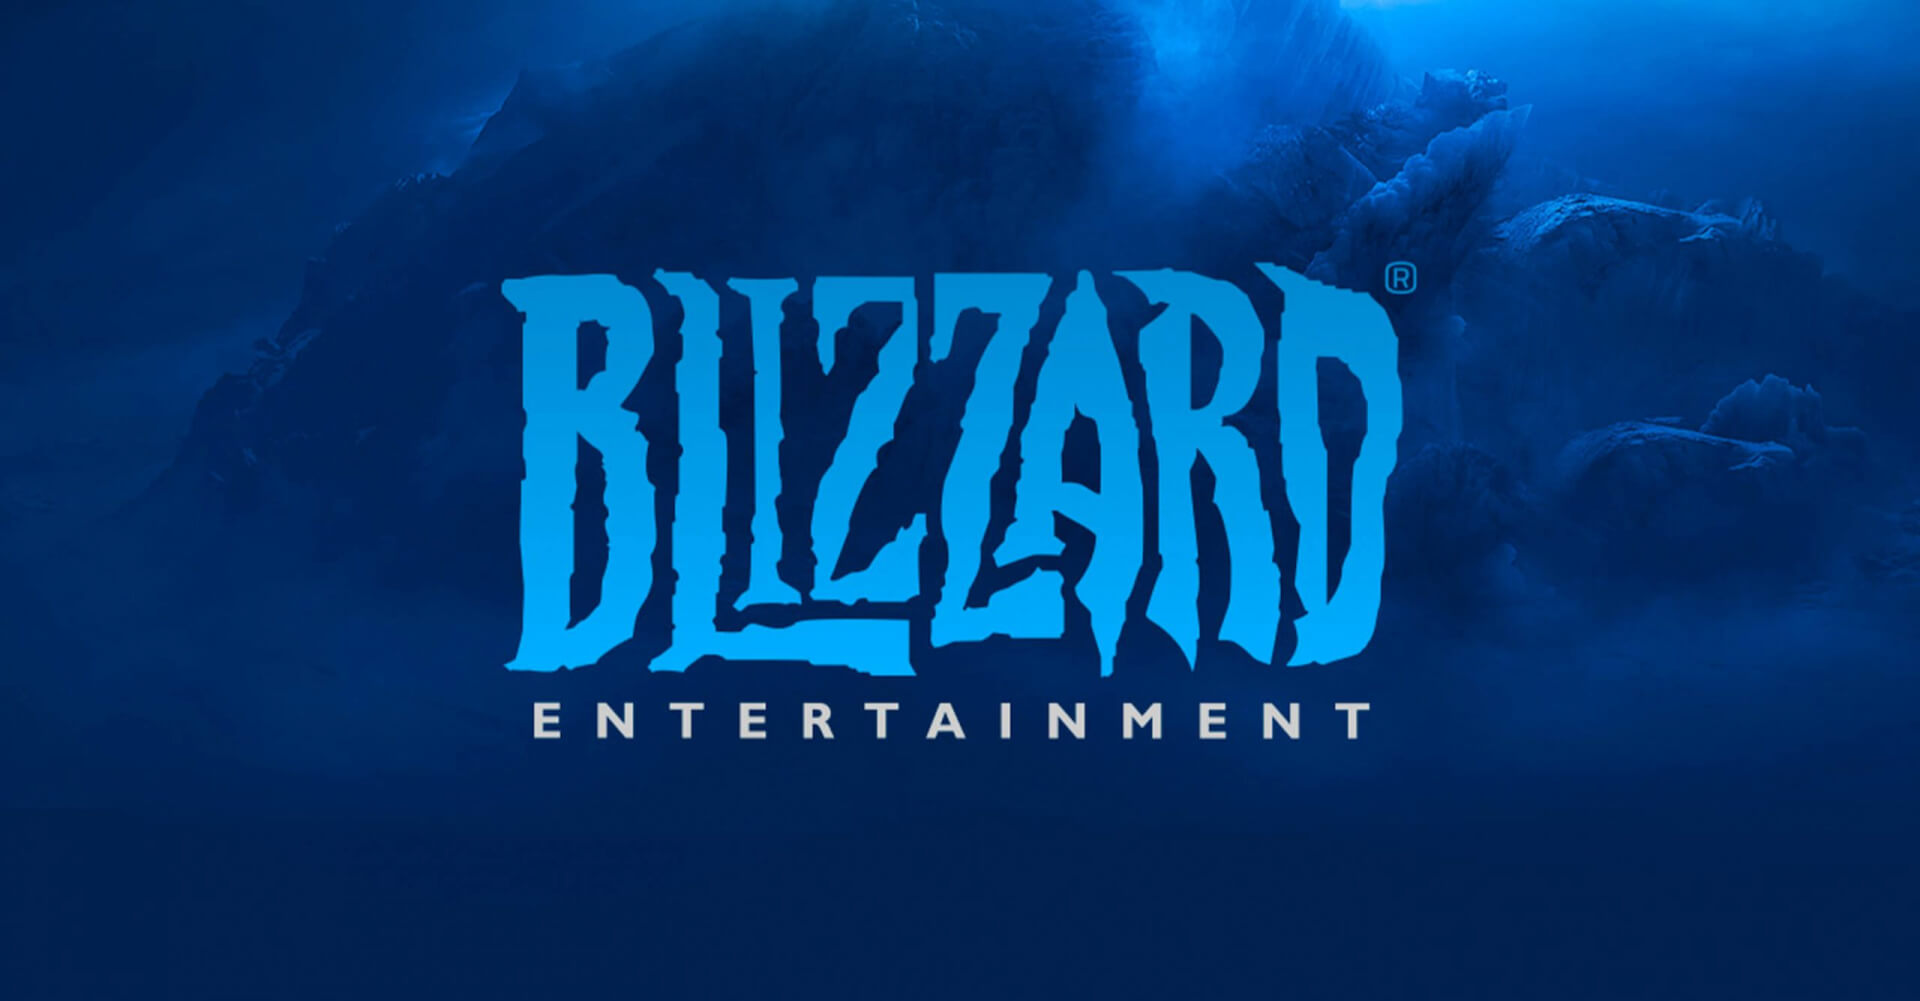 download blizzard arcade collection ps4